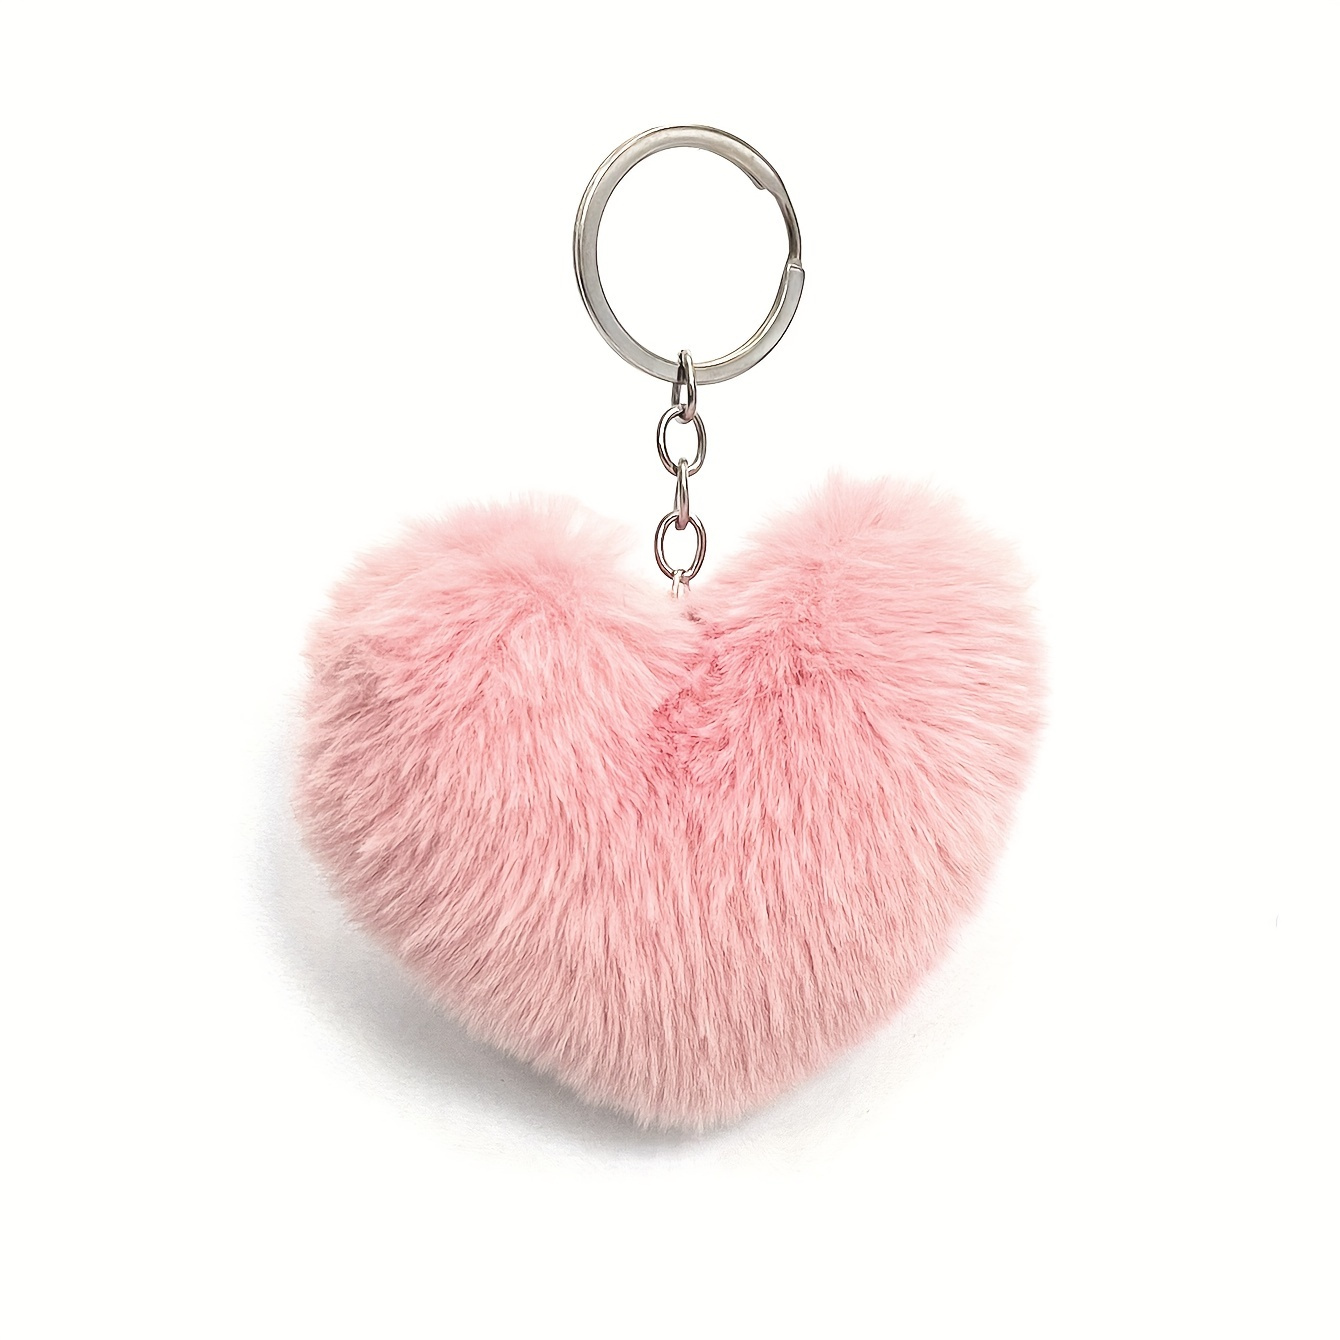 Lovely Crystal Ballet Girl Keychains Dancing Angel Fluffy Puff Ball Pendant  Fur Key Chain Car Styling Bag Jewelry Pompom Keyring (Pink) 